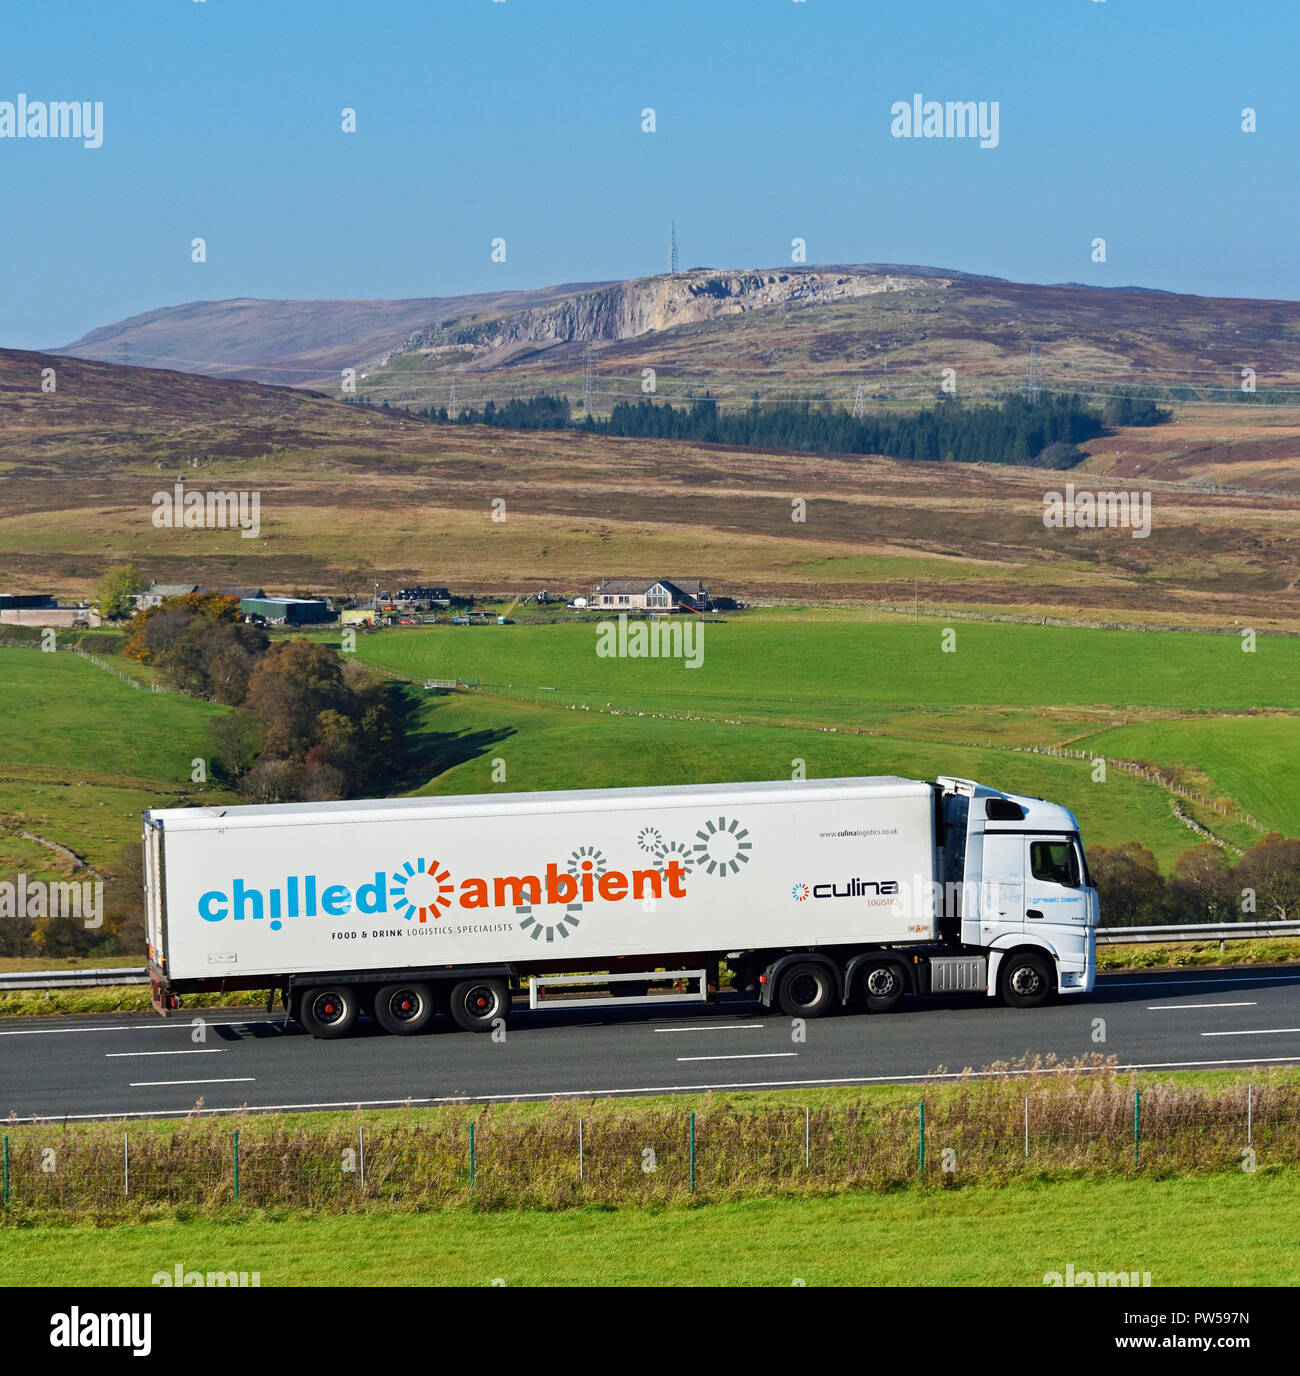 Culina Logistics HGV. Chilled and Ambient food and drink logistics specialists. M6 Northbound carriageway, Shap, Cumbria, England, United Kingdom. Stock Photo